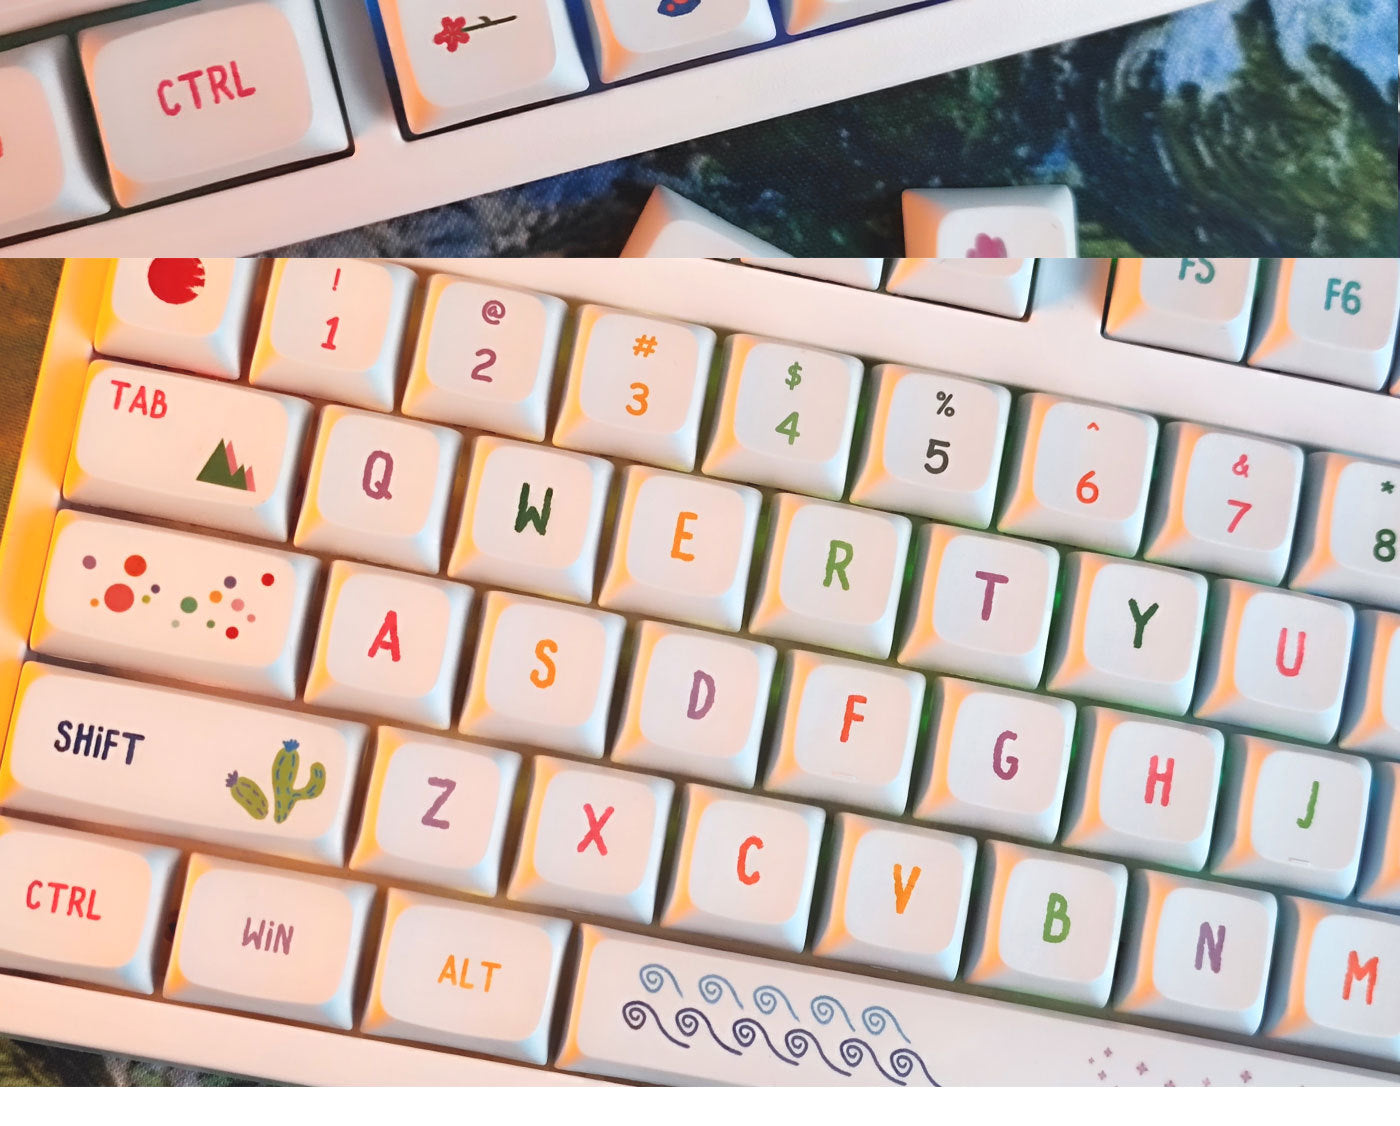 100% Full Size Colorful Summer Themed Keycaps